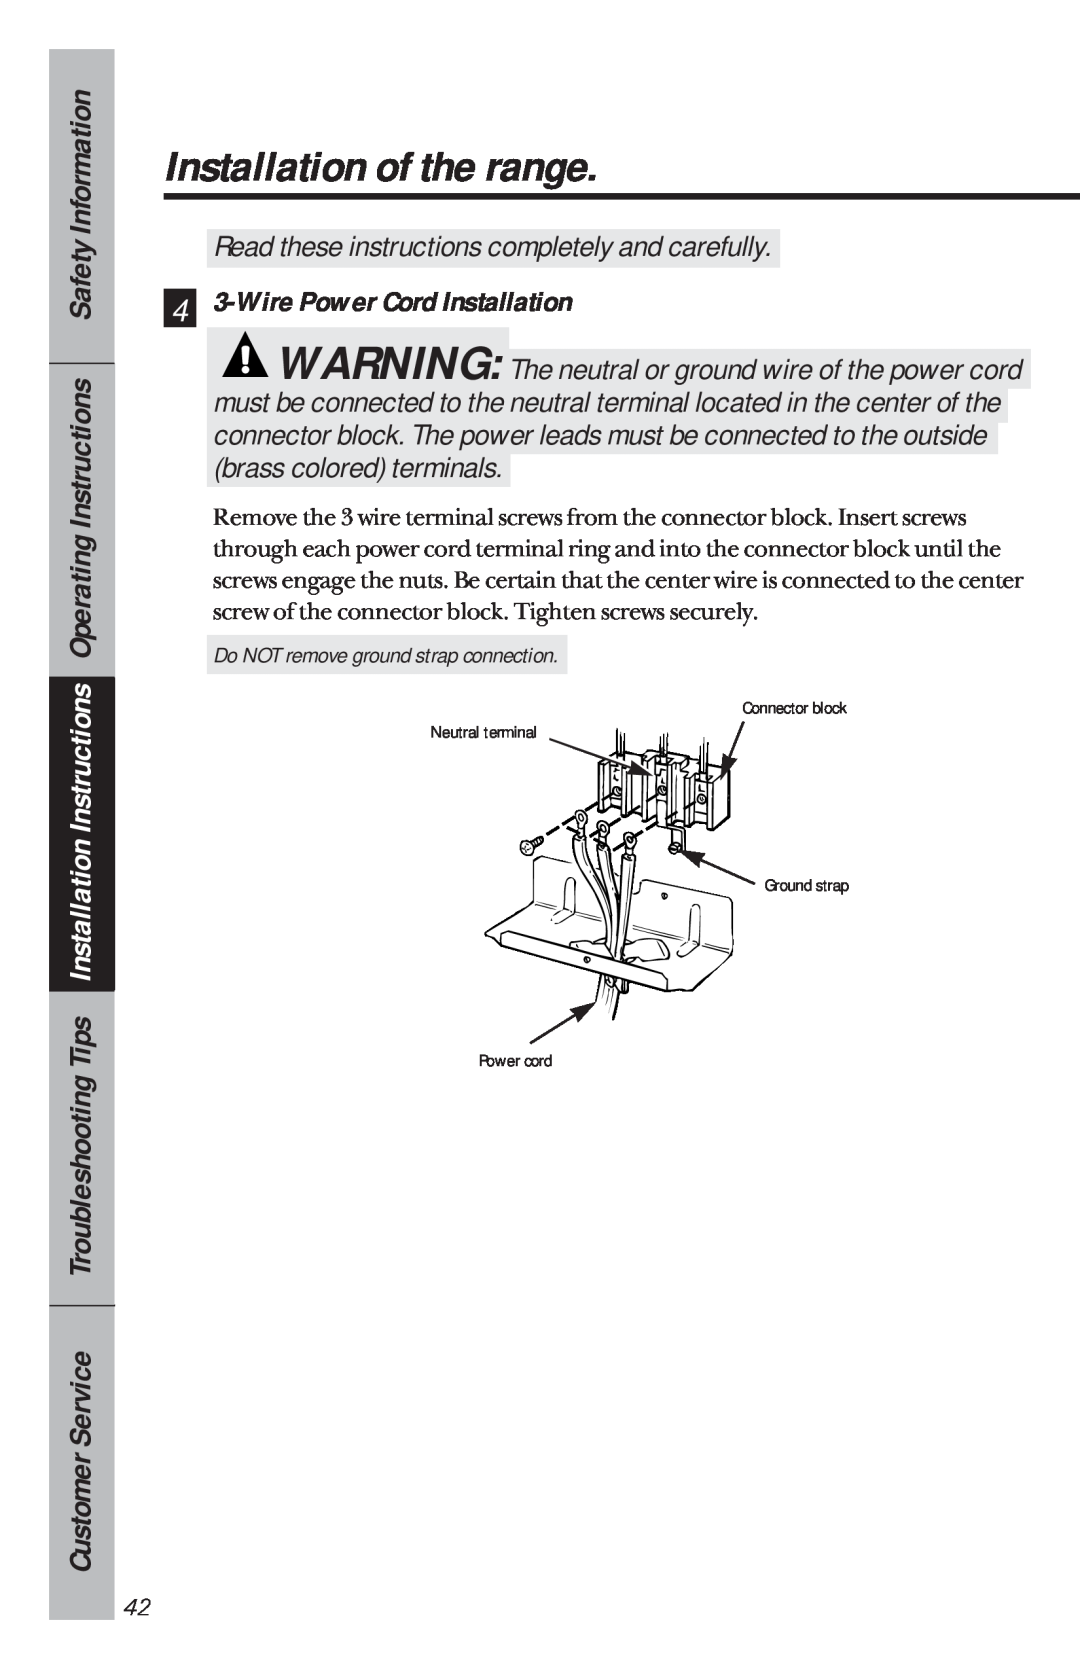 GE 49-8780 4 3-Wire Power Cord Installation, Installation of the range, Read these instructions completely and carefully 